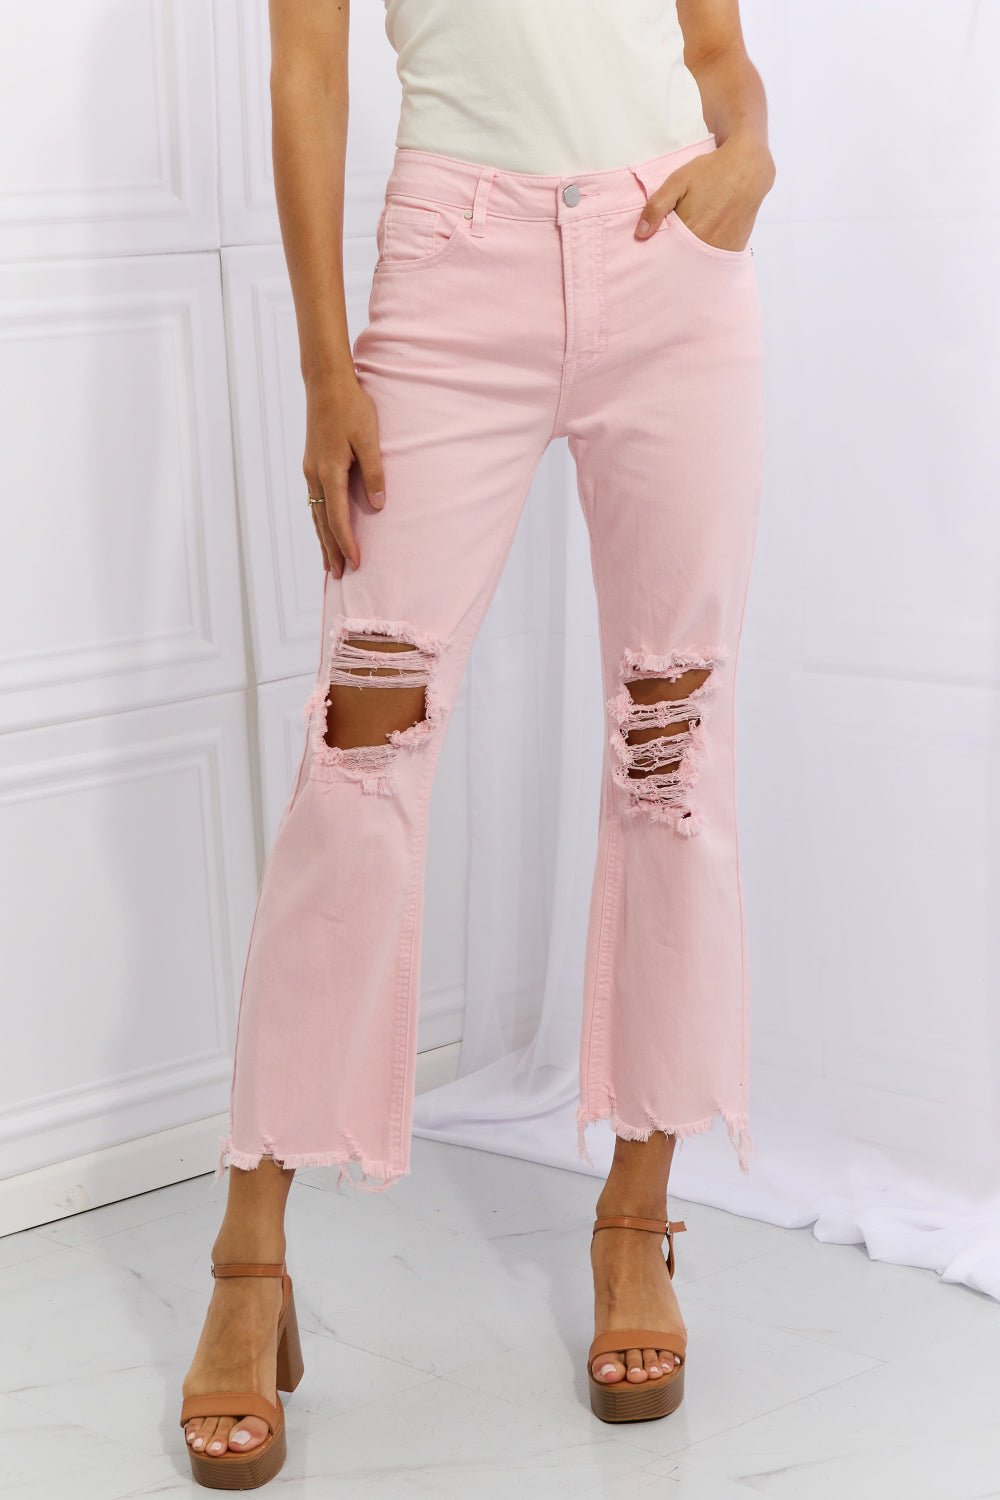 RISEN Miley Full Size Distressed Ankle Flare Jeans - KRE Prime Deals